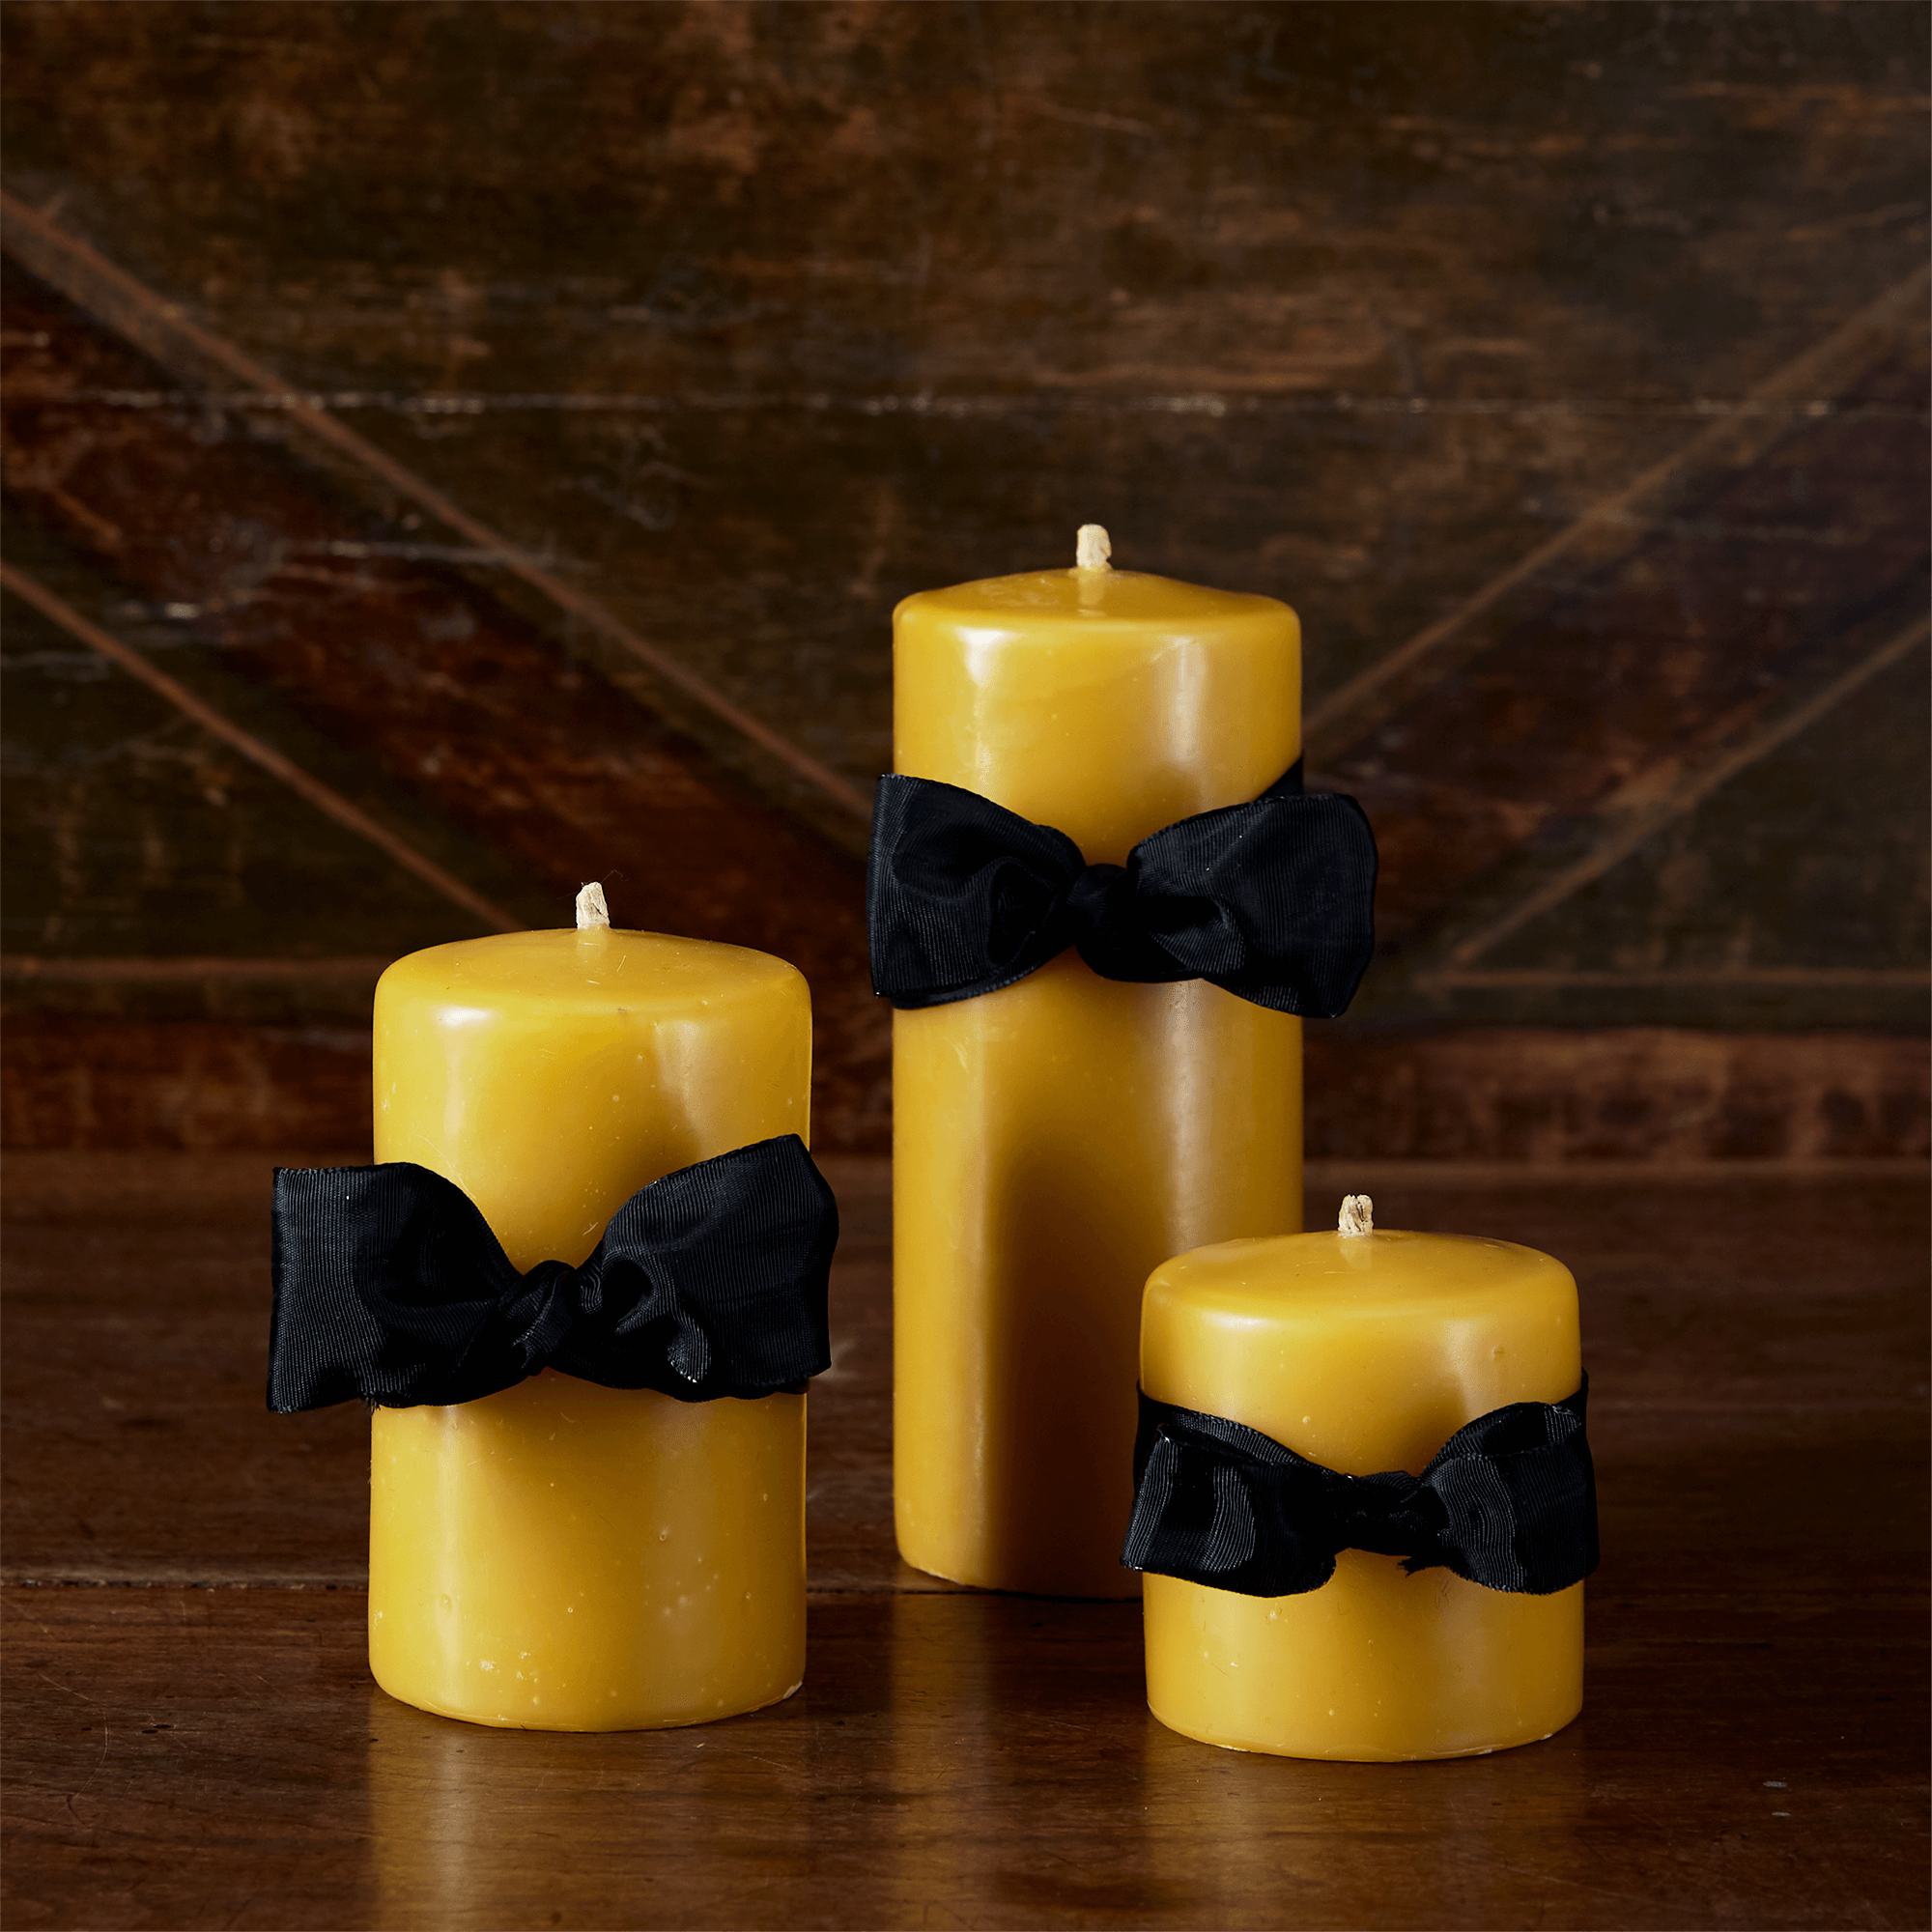 Beeswax Pillar Candle - Different Sizes Pillars - Matching tray for candle